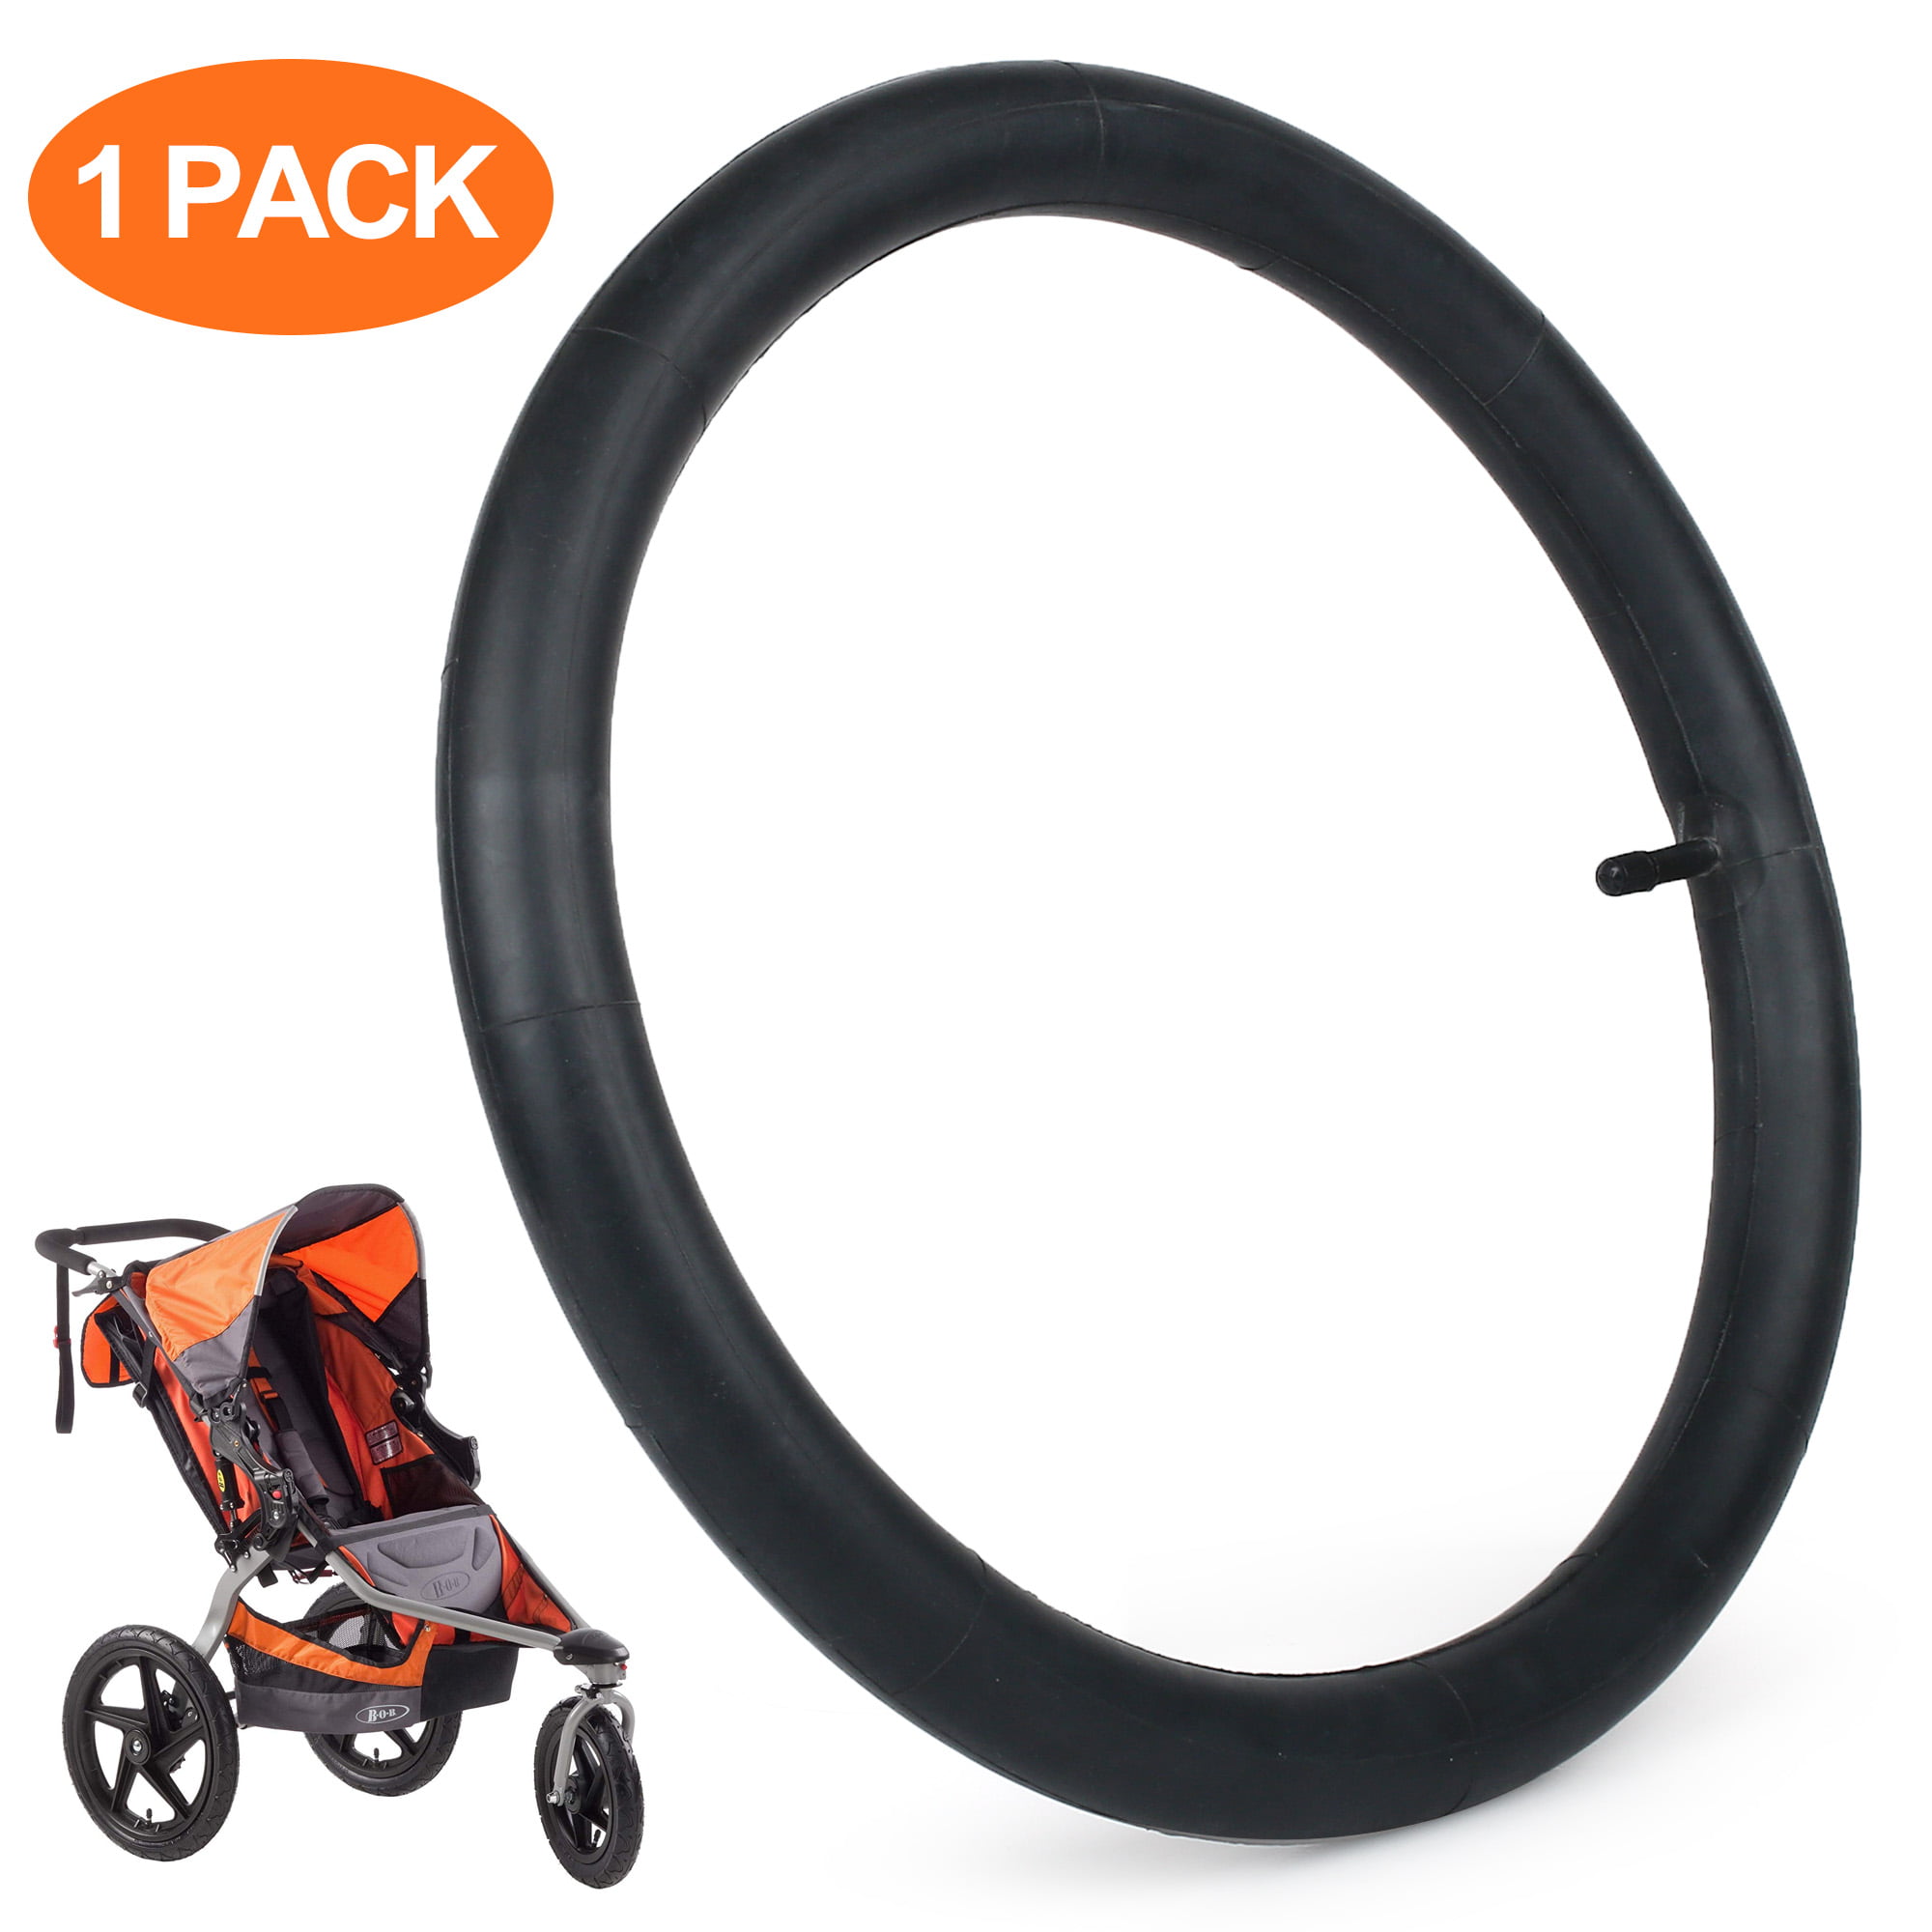 Ultraverse Baby Stroller Inner Tube for Back Wheel 16” X 1.75/1.95/2.10/2.125 and Front 12” X 1.75/1.95 inch Front tire Sizes Compatible with Graco Click/Go Jogging/BoB Revolution SE/Pro/Flex/SU 